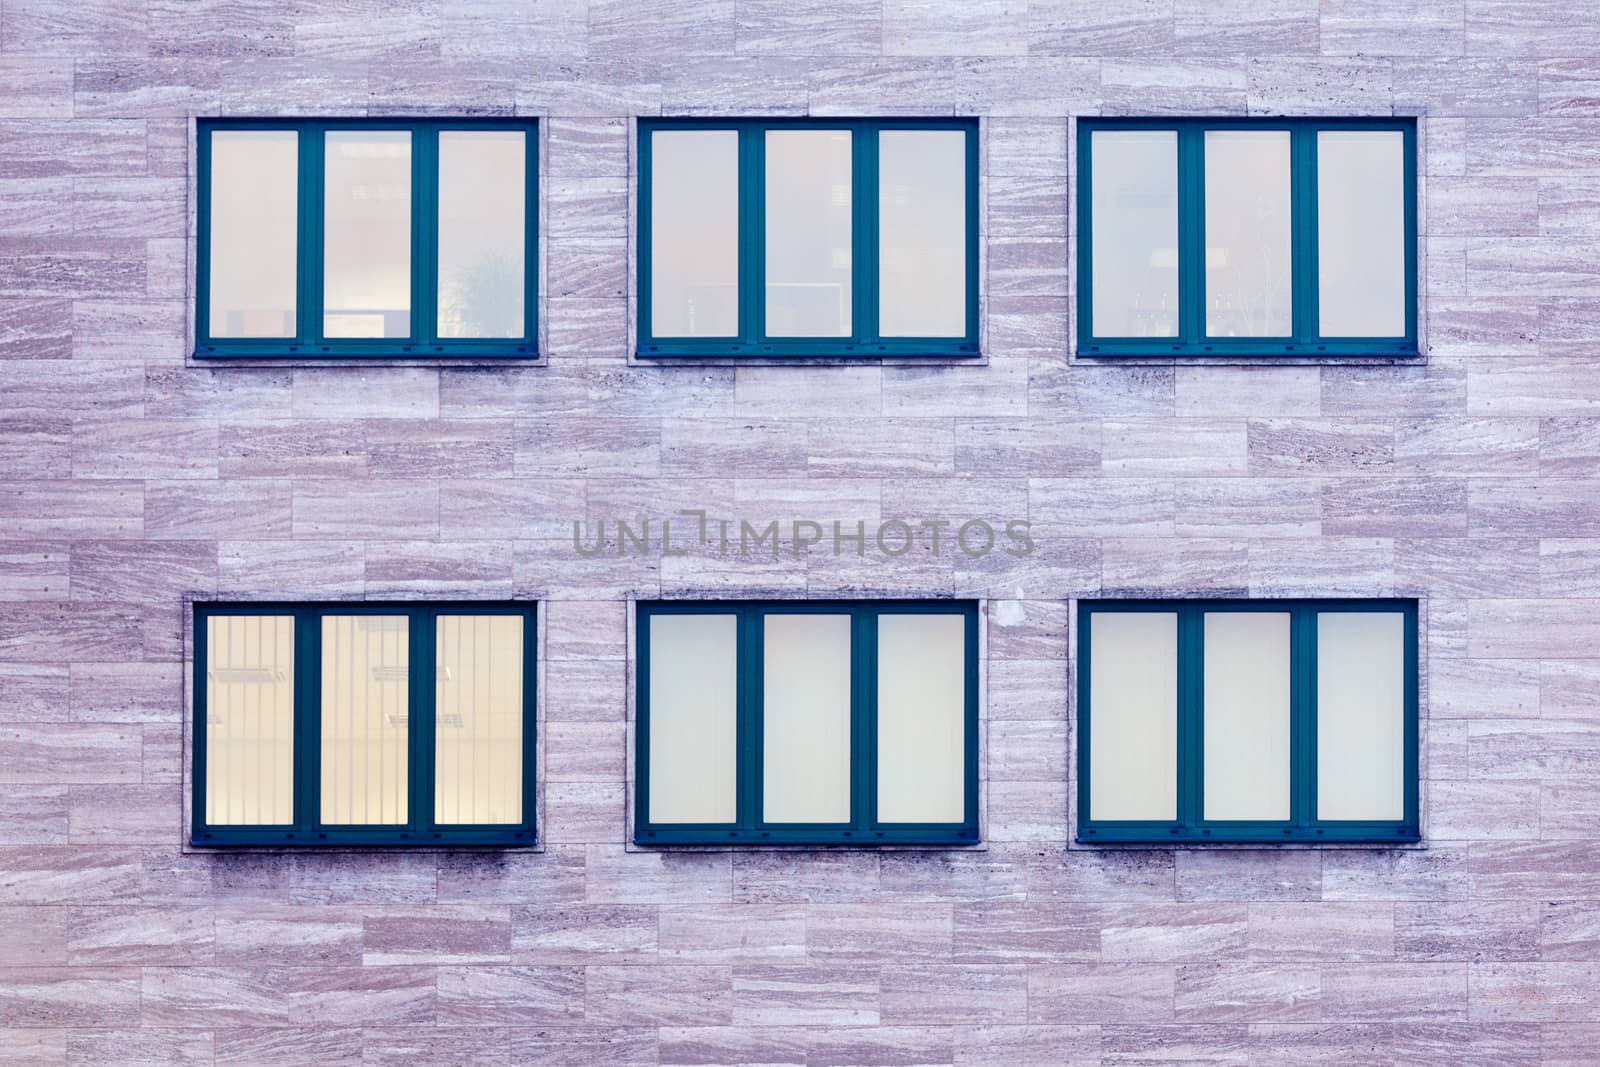 Commercial building windows architecture pattern by PiLens